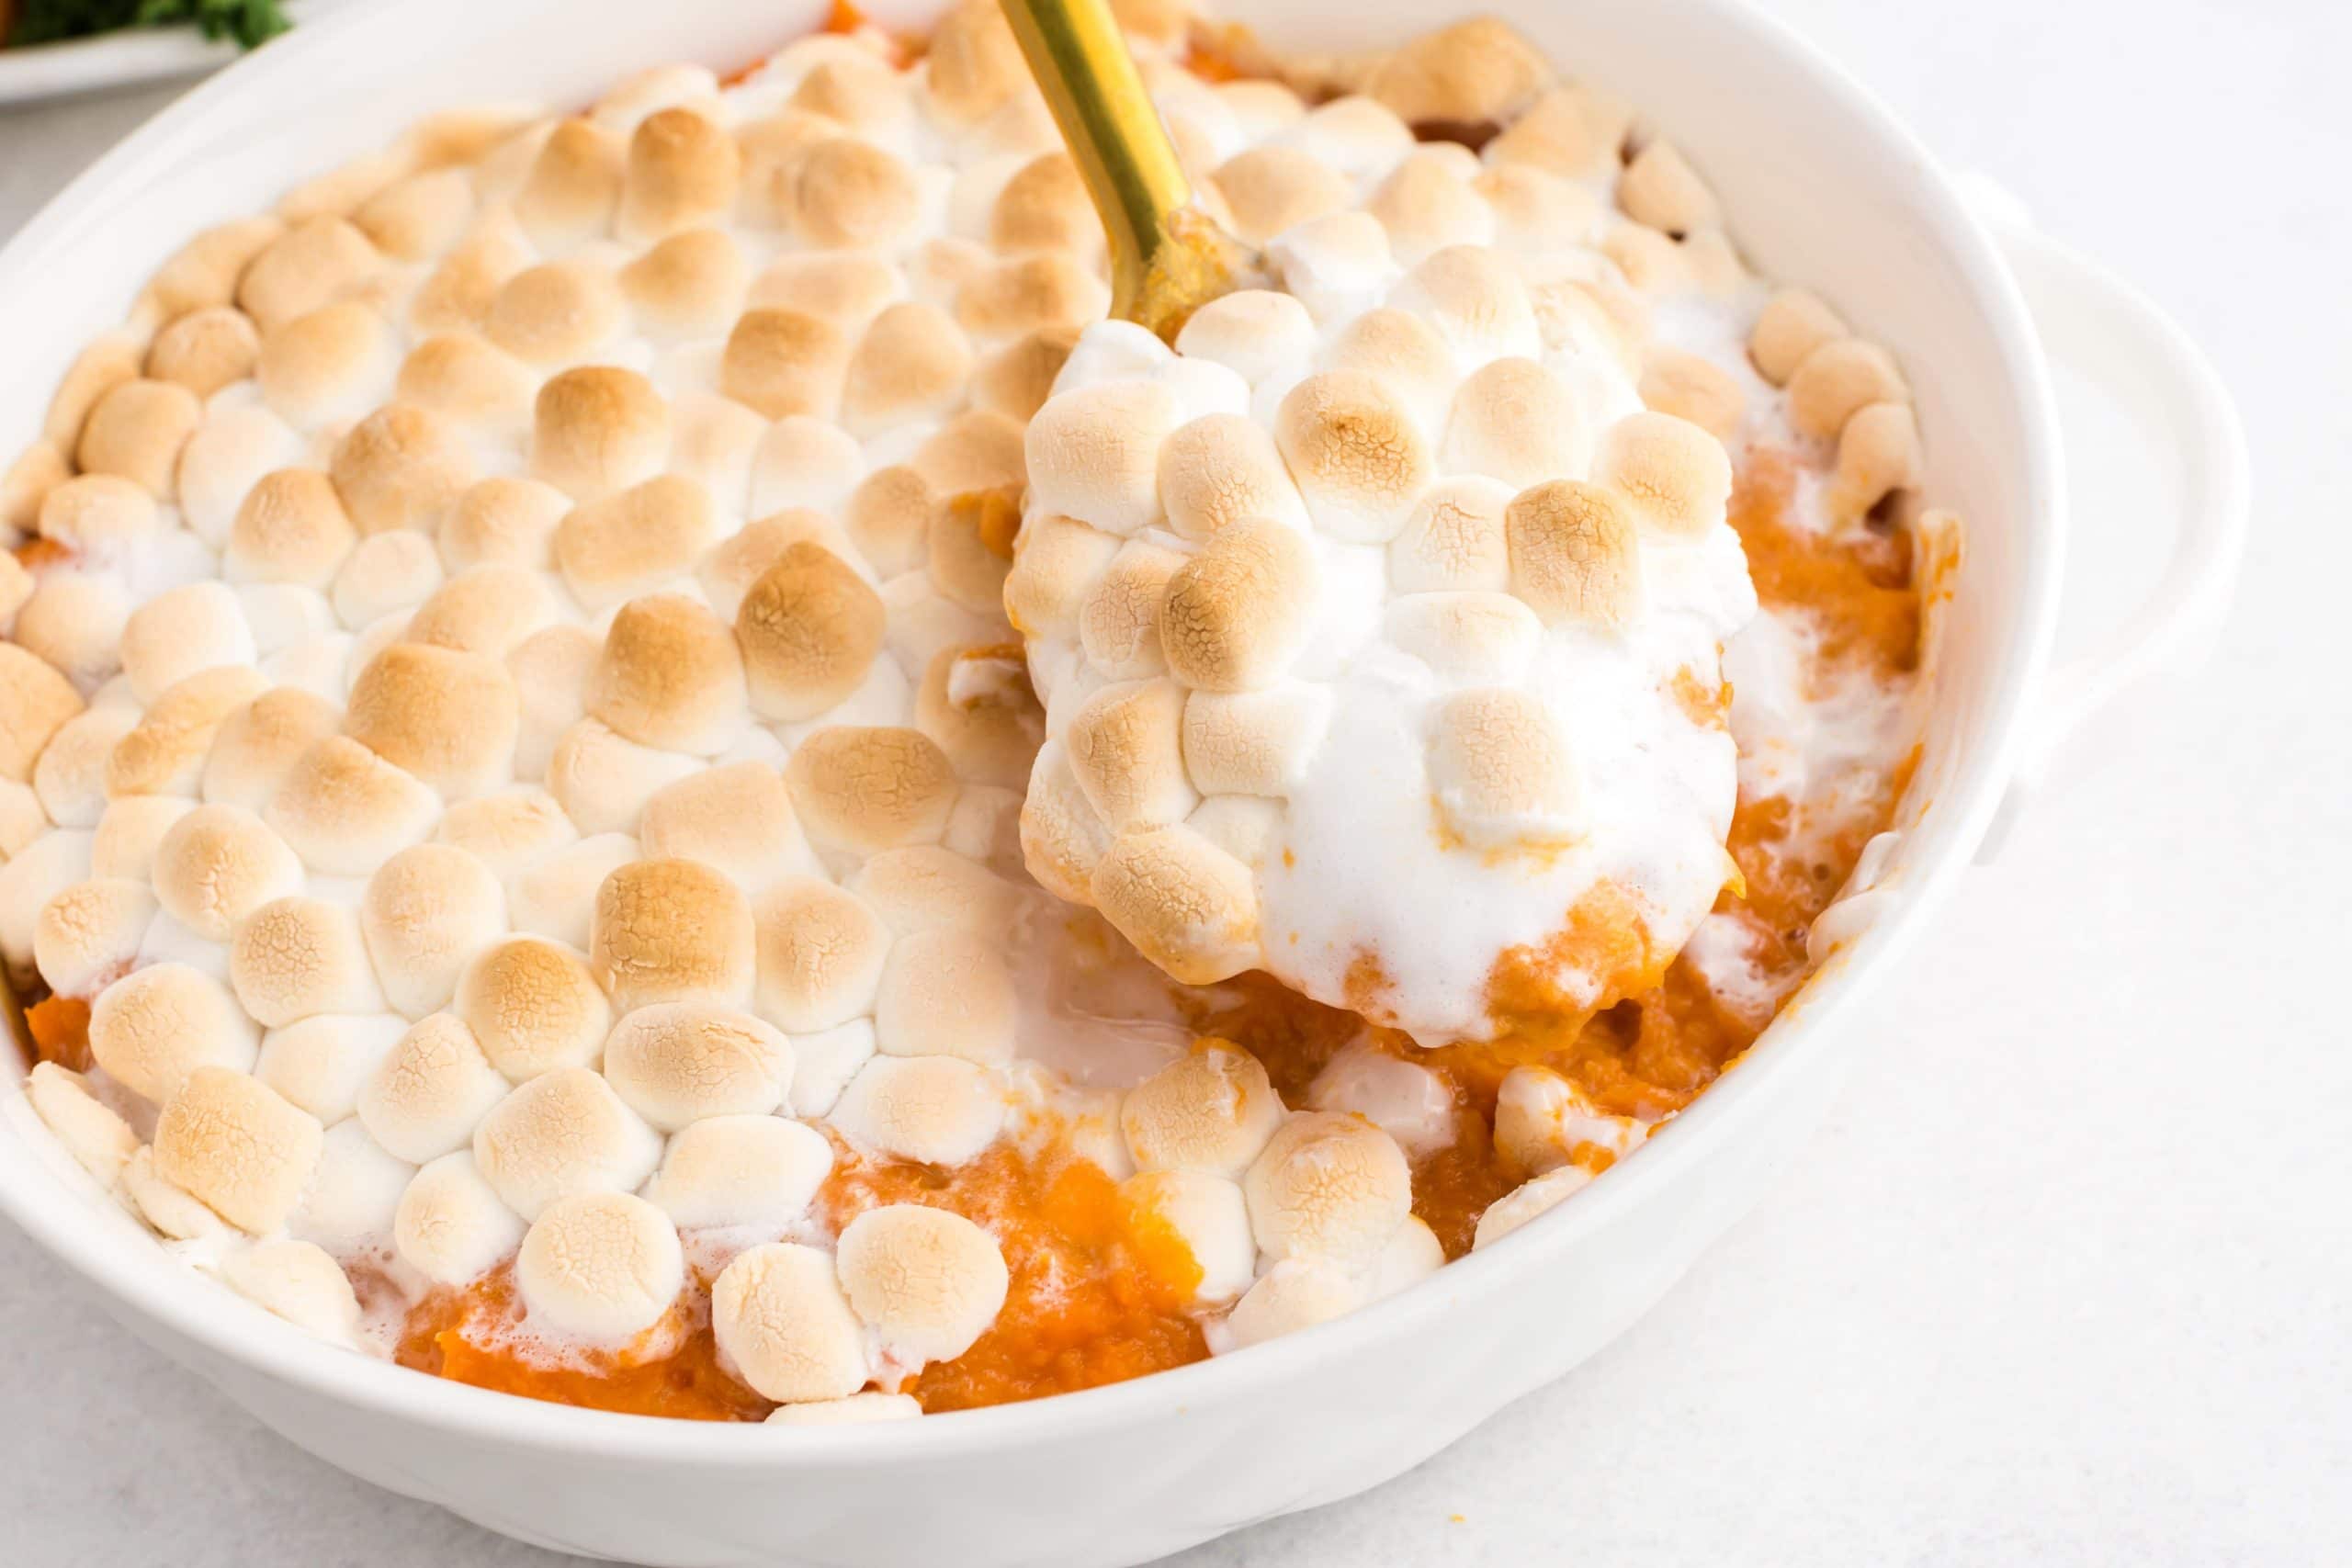 Candied Yams with Marshmallows